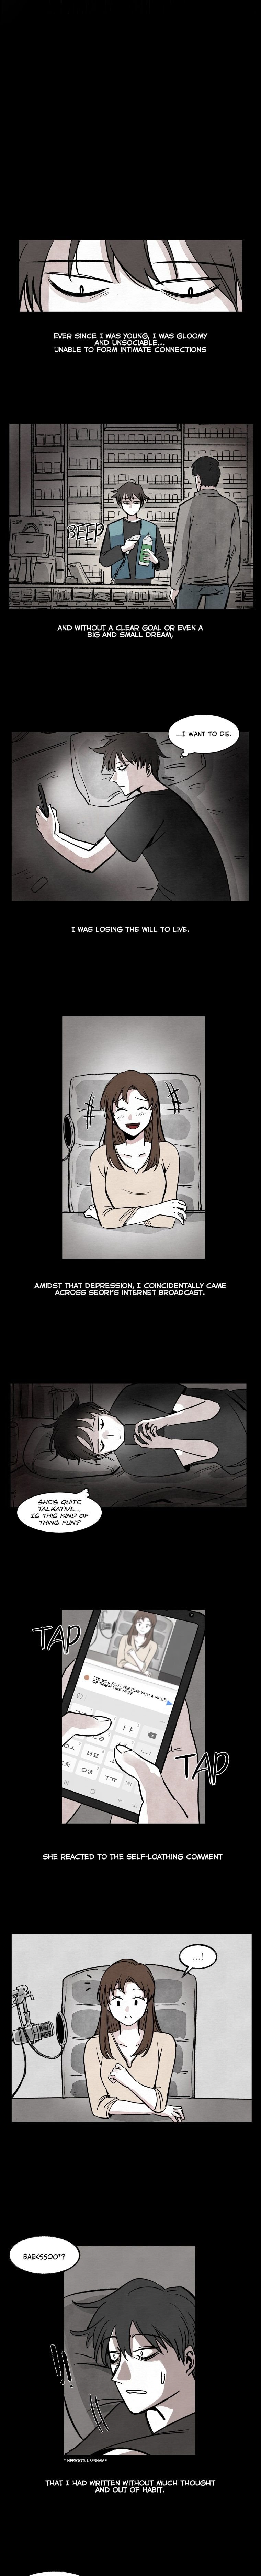 Devil’s Editing Chapter 1 - Page 9